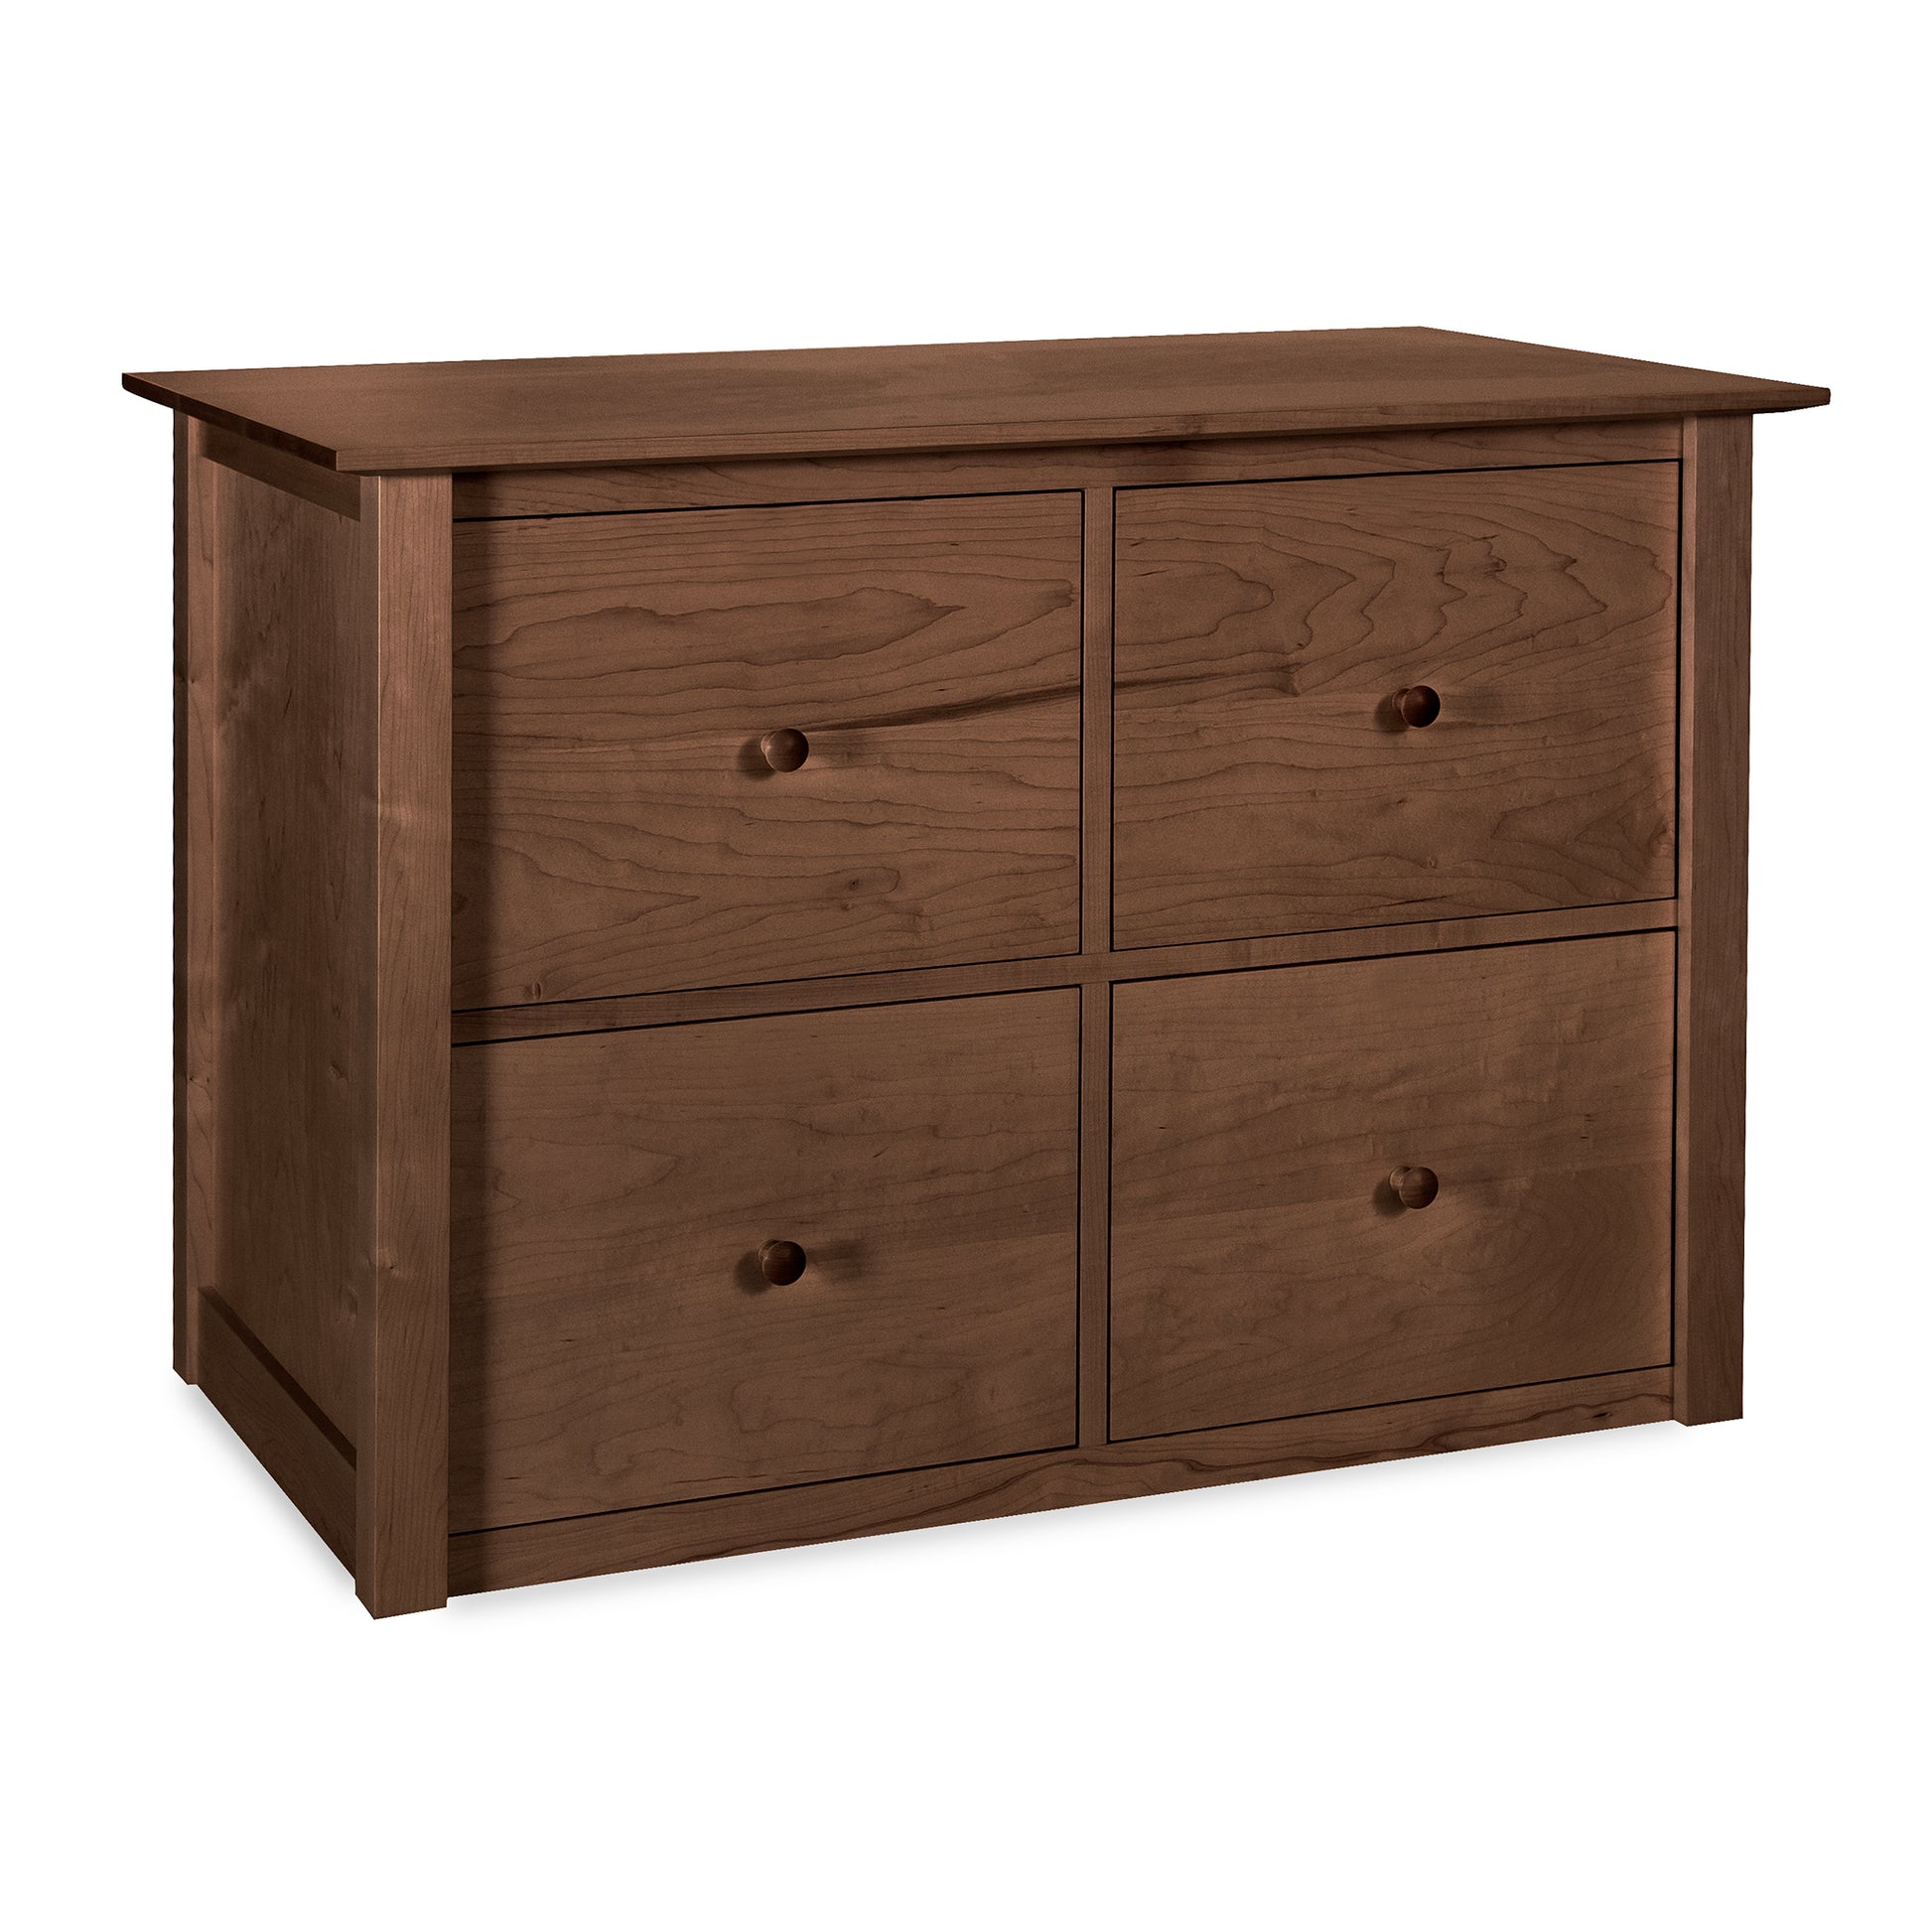 A Maple Corner Woodworks American Shaker 4-Drawer File Credenza with round knobs on a white background.